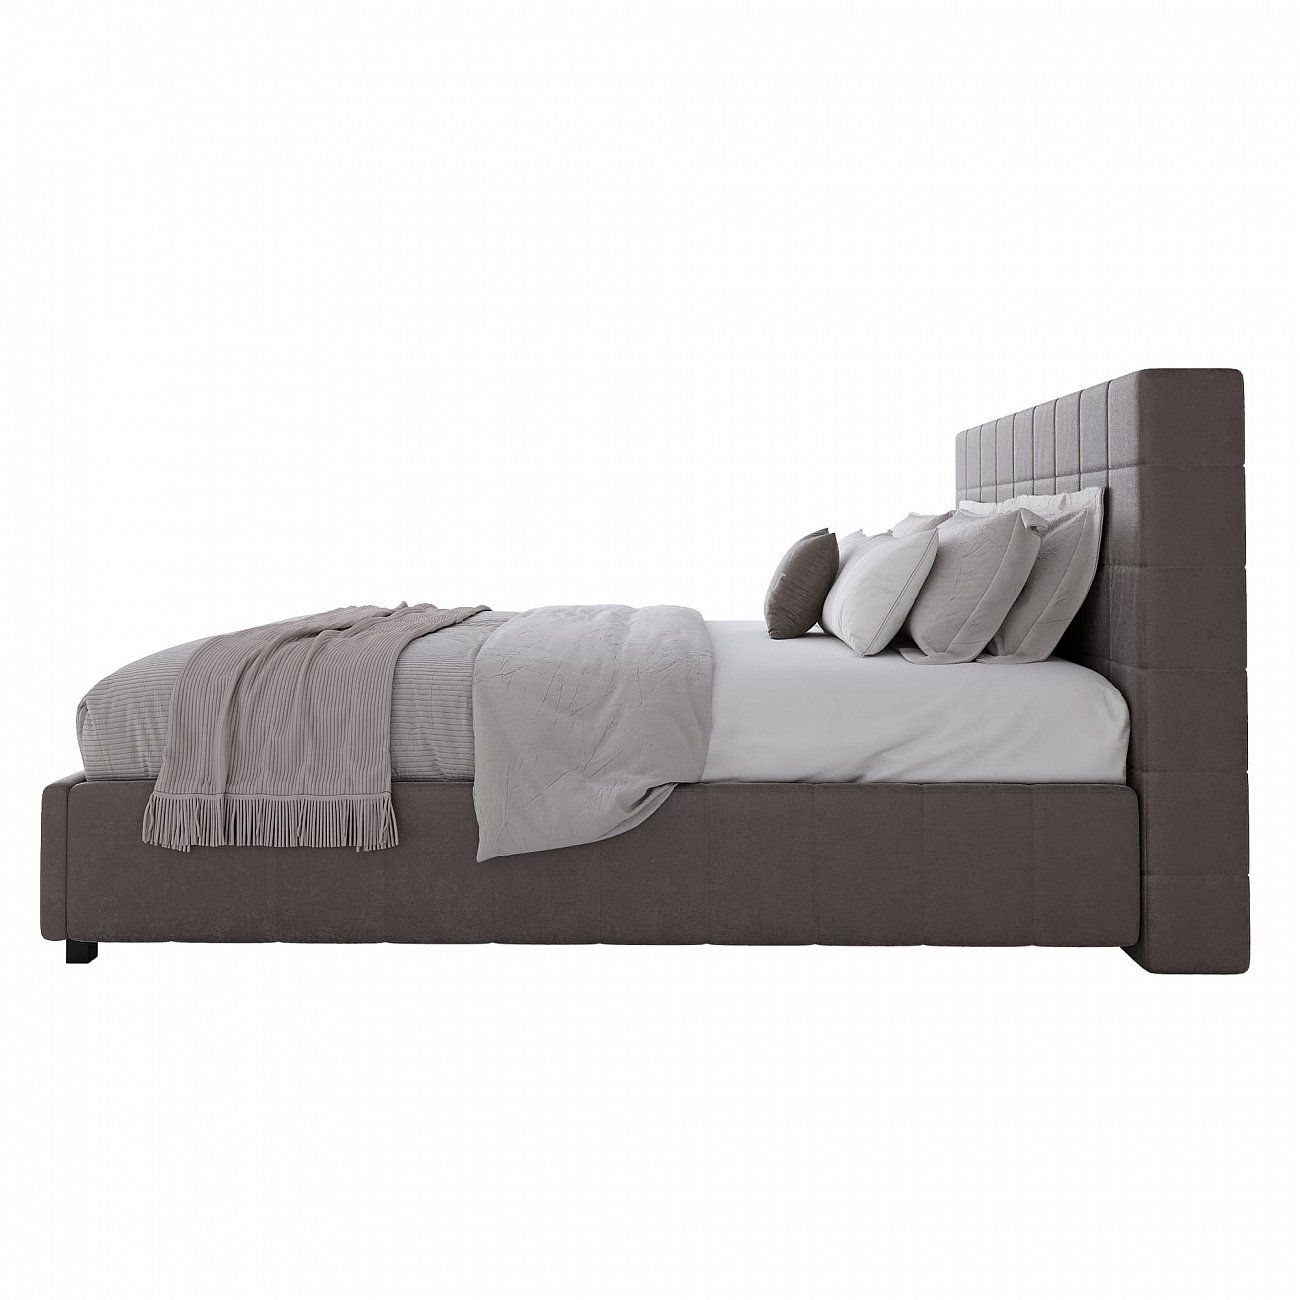 Double bed 180x200 cm gray-brown Shining Modern